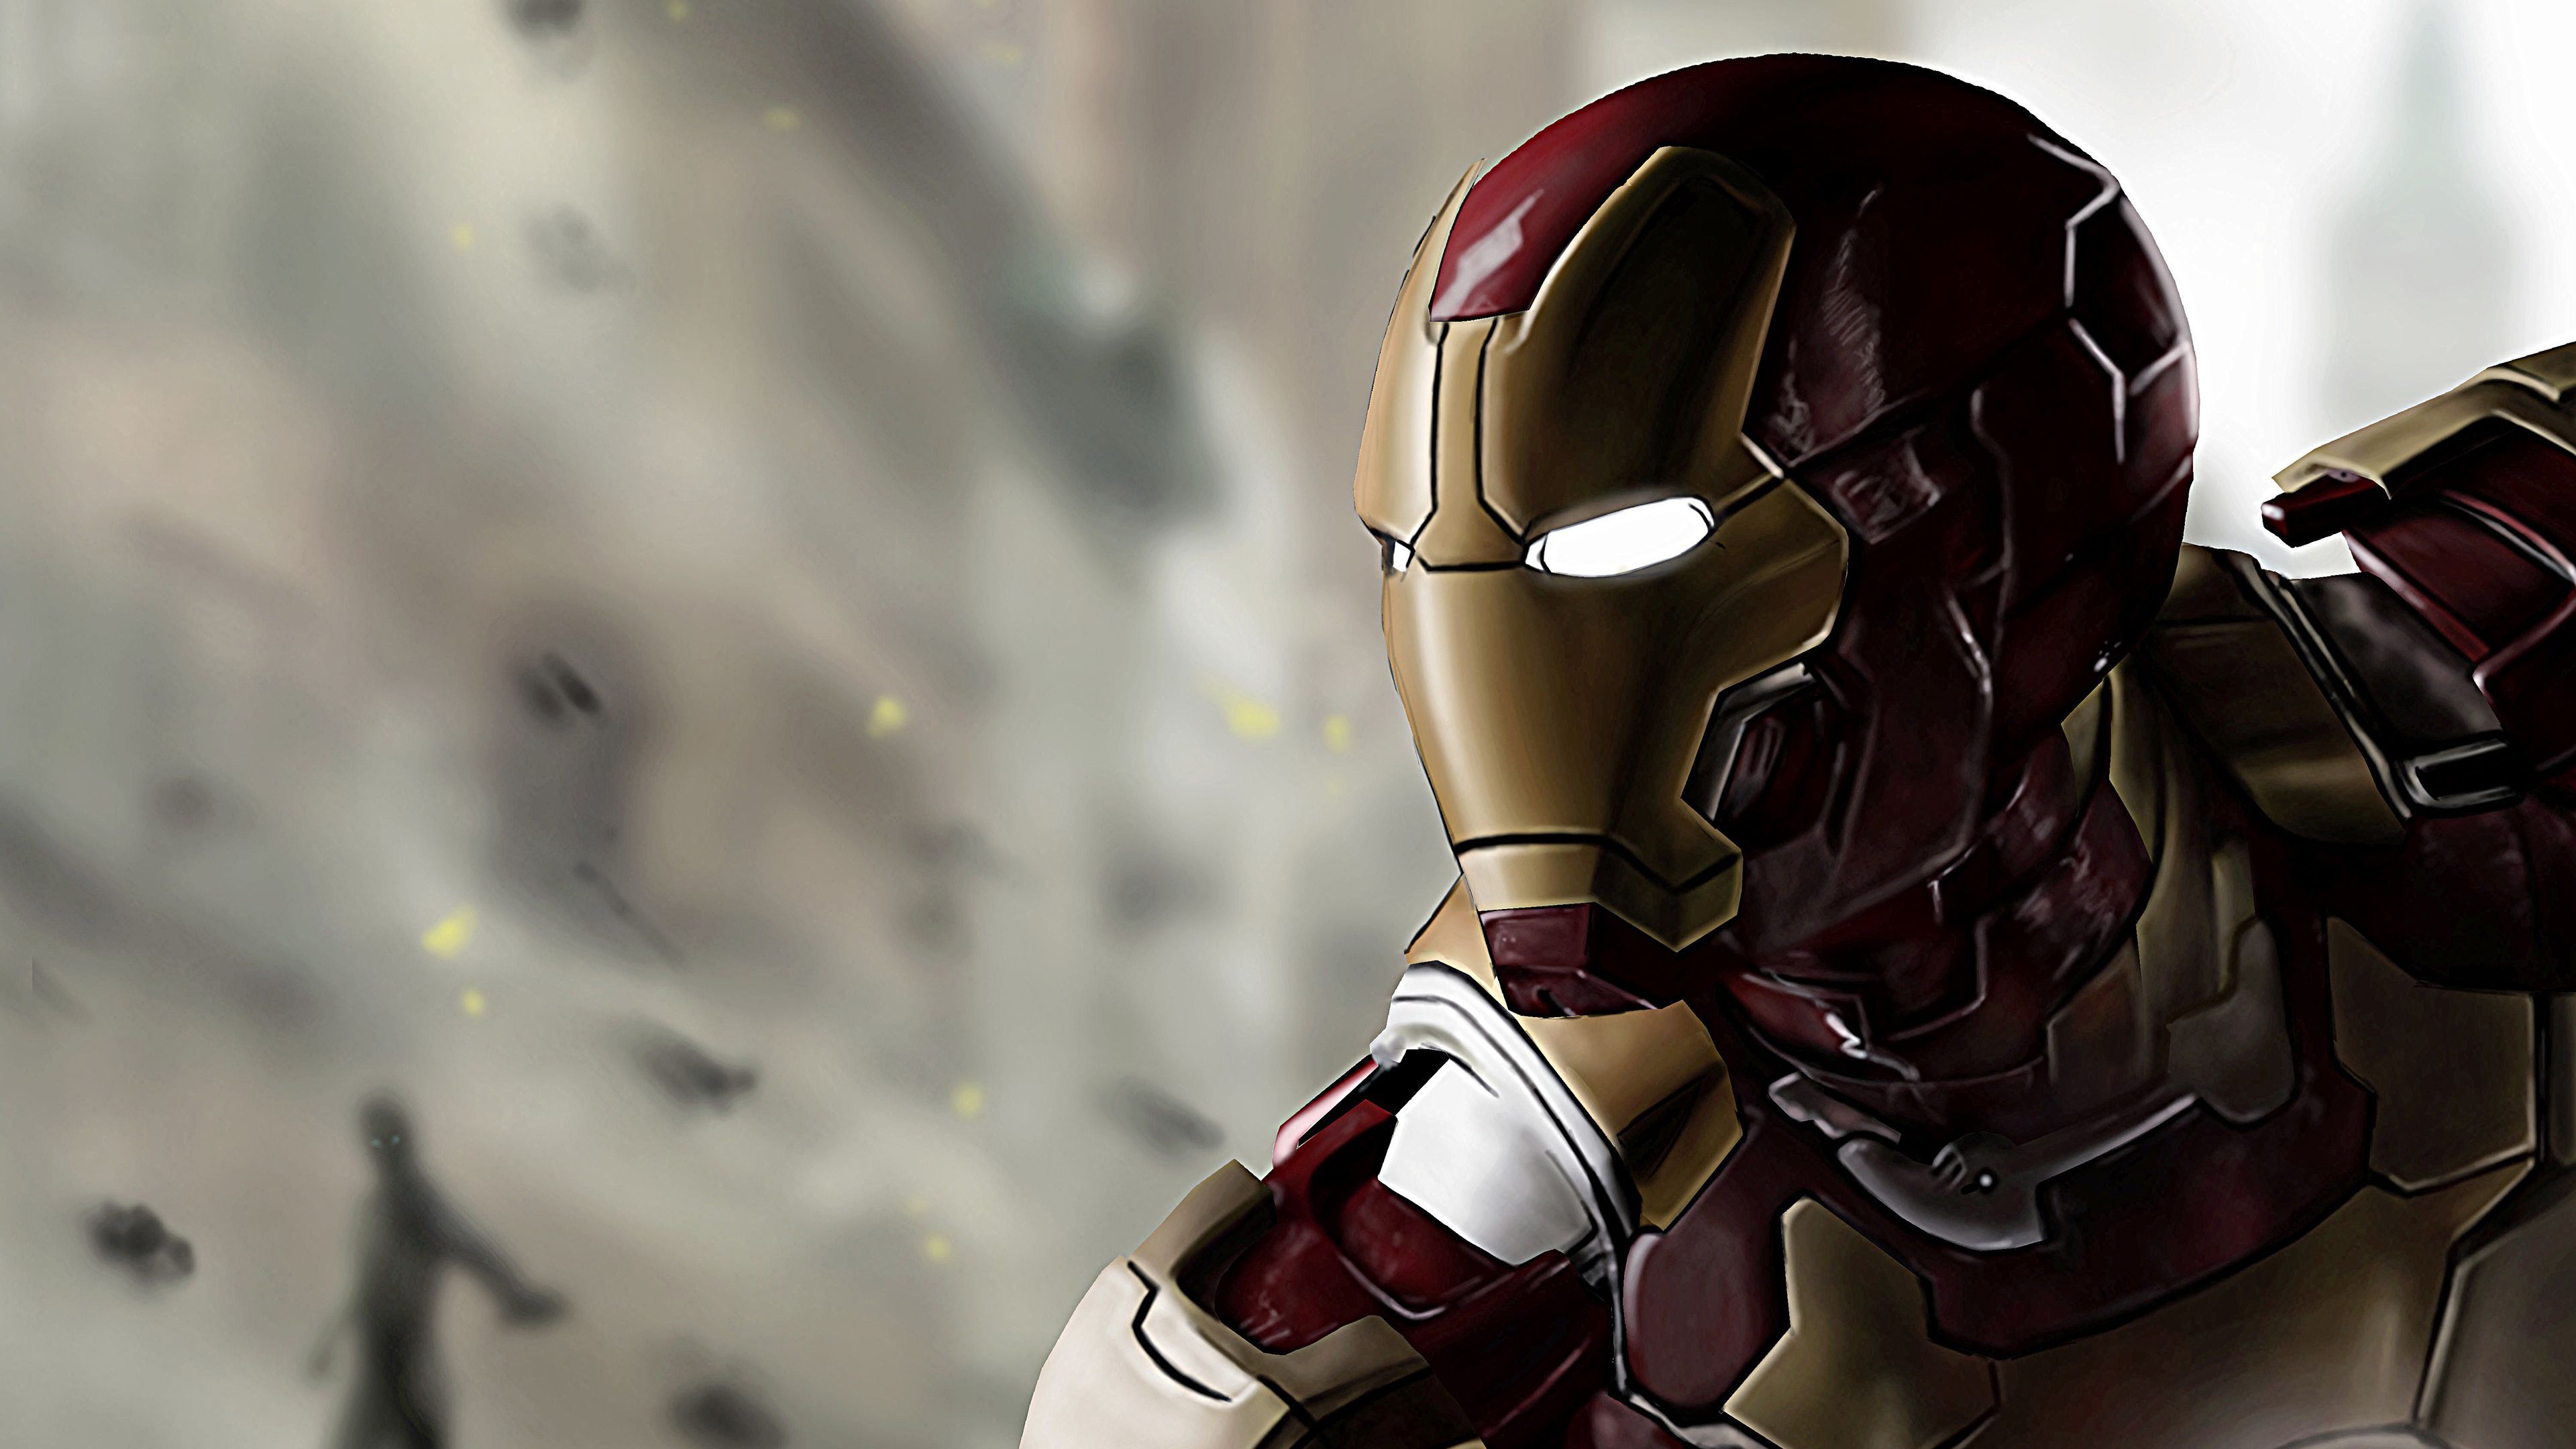 Iron Man In Avengers Age Of Ultron 4k Superheroes Wallpaper, Iron Man Wallpaper, Hd Wallpaper, Digital Art Wallpape. Iron Man Wallpaper, Iron Man, Avengers Age